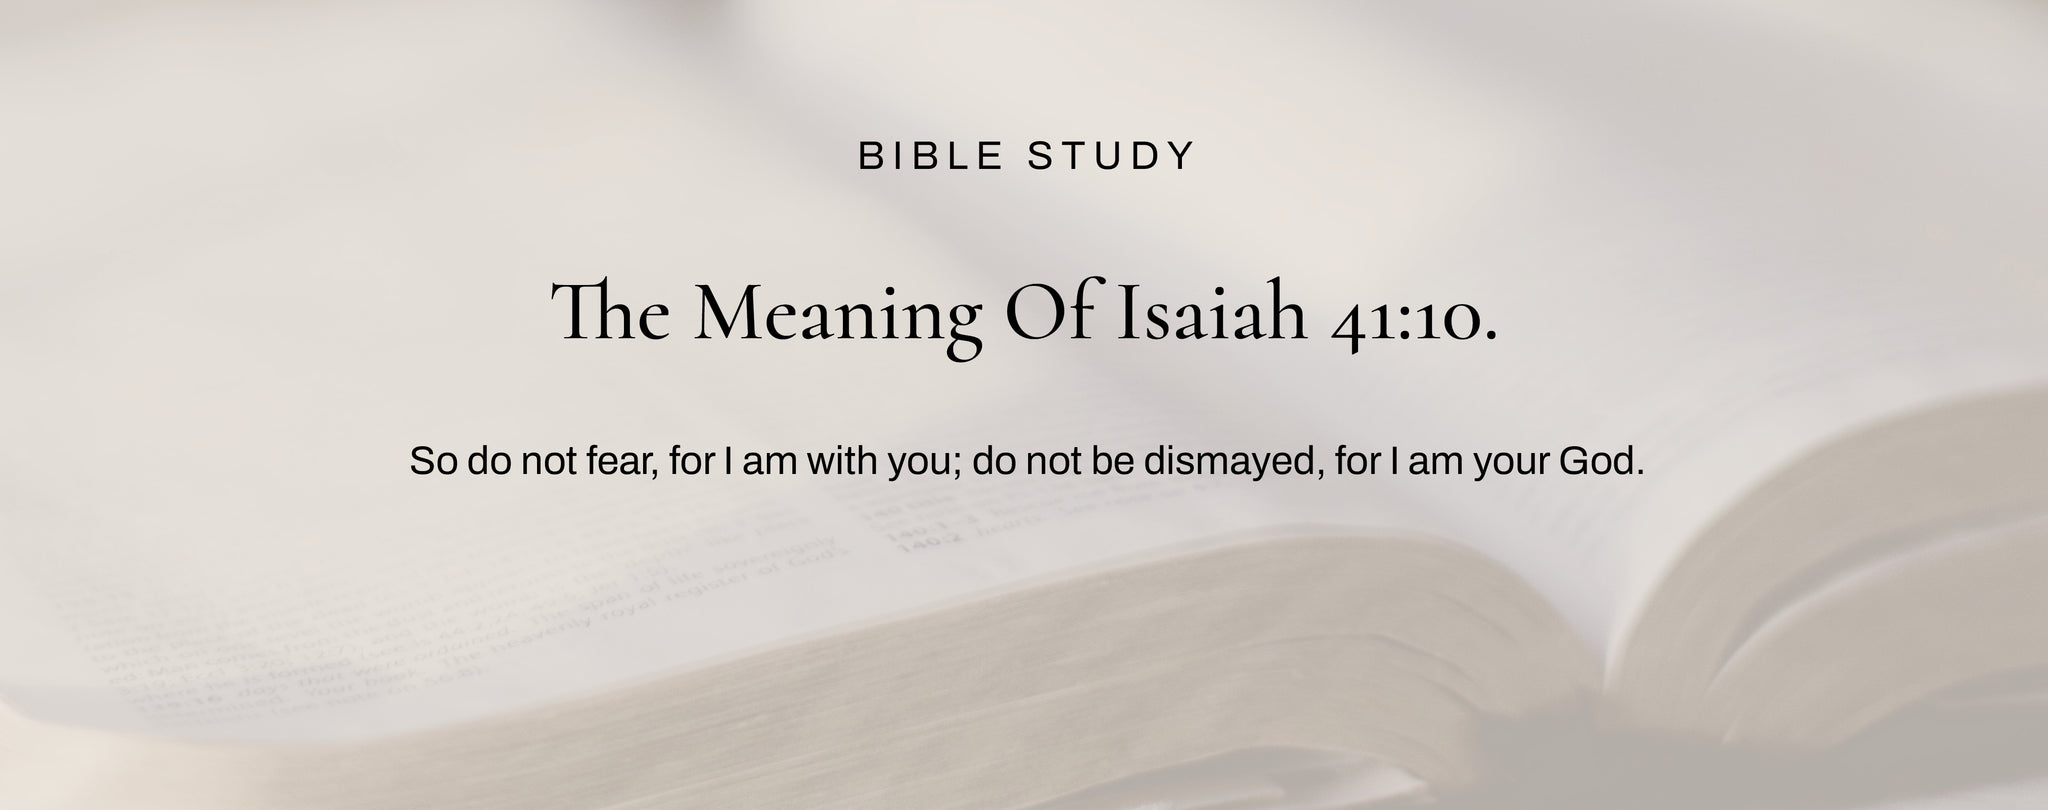 What Does Isaiah 41: 10 Mean?